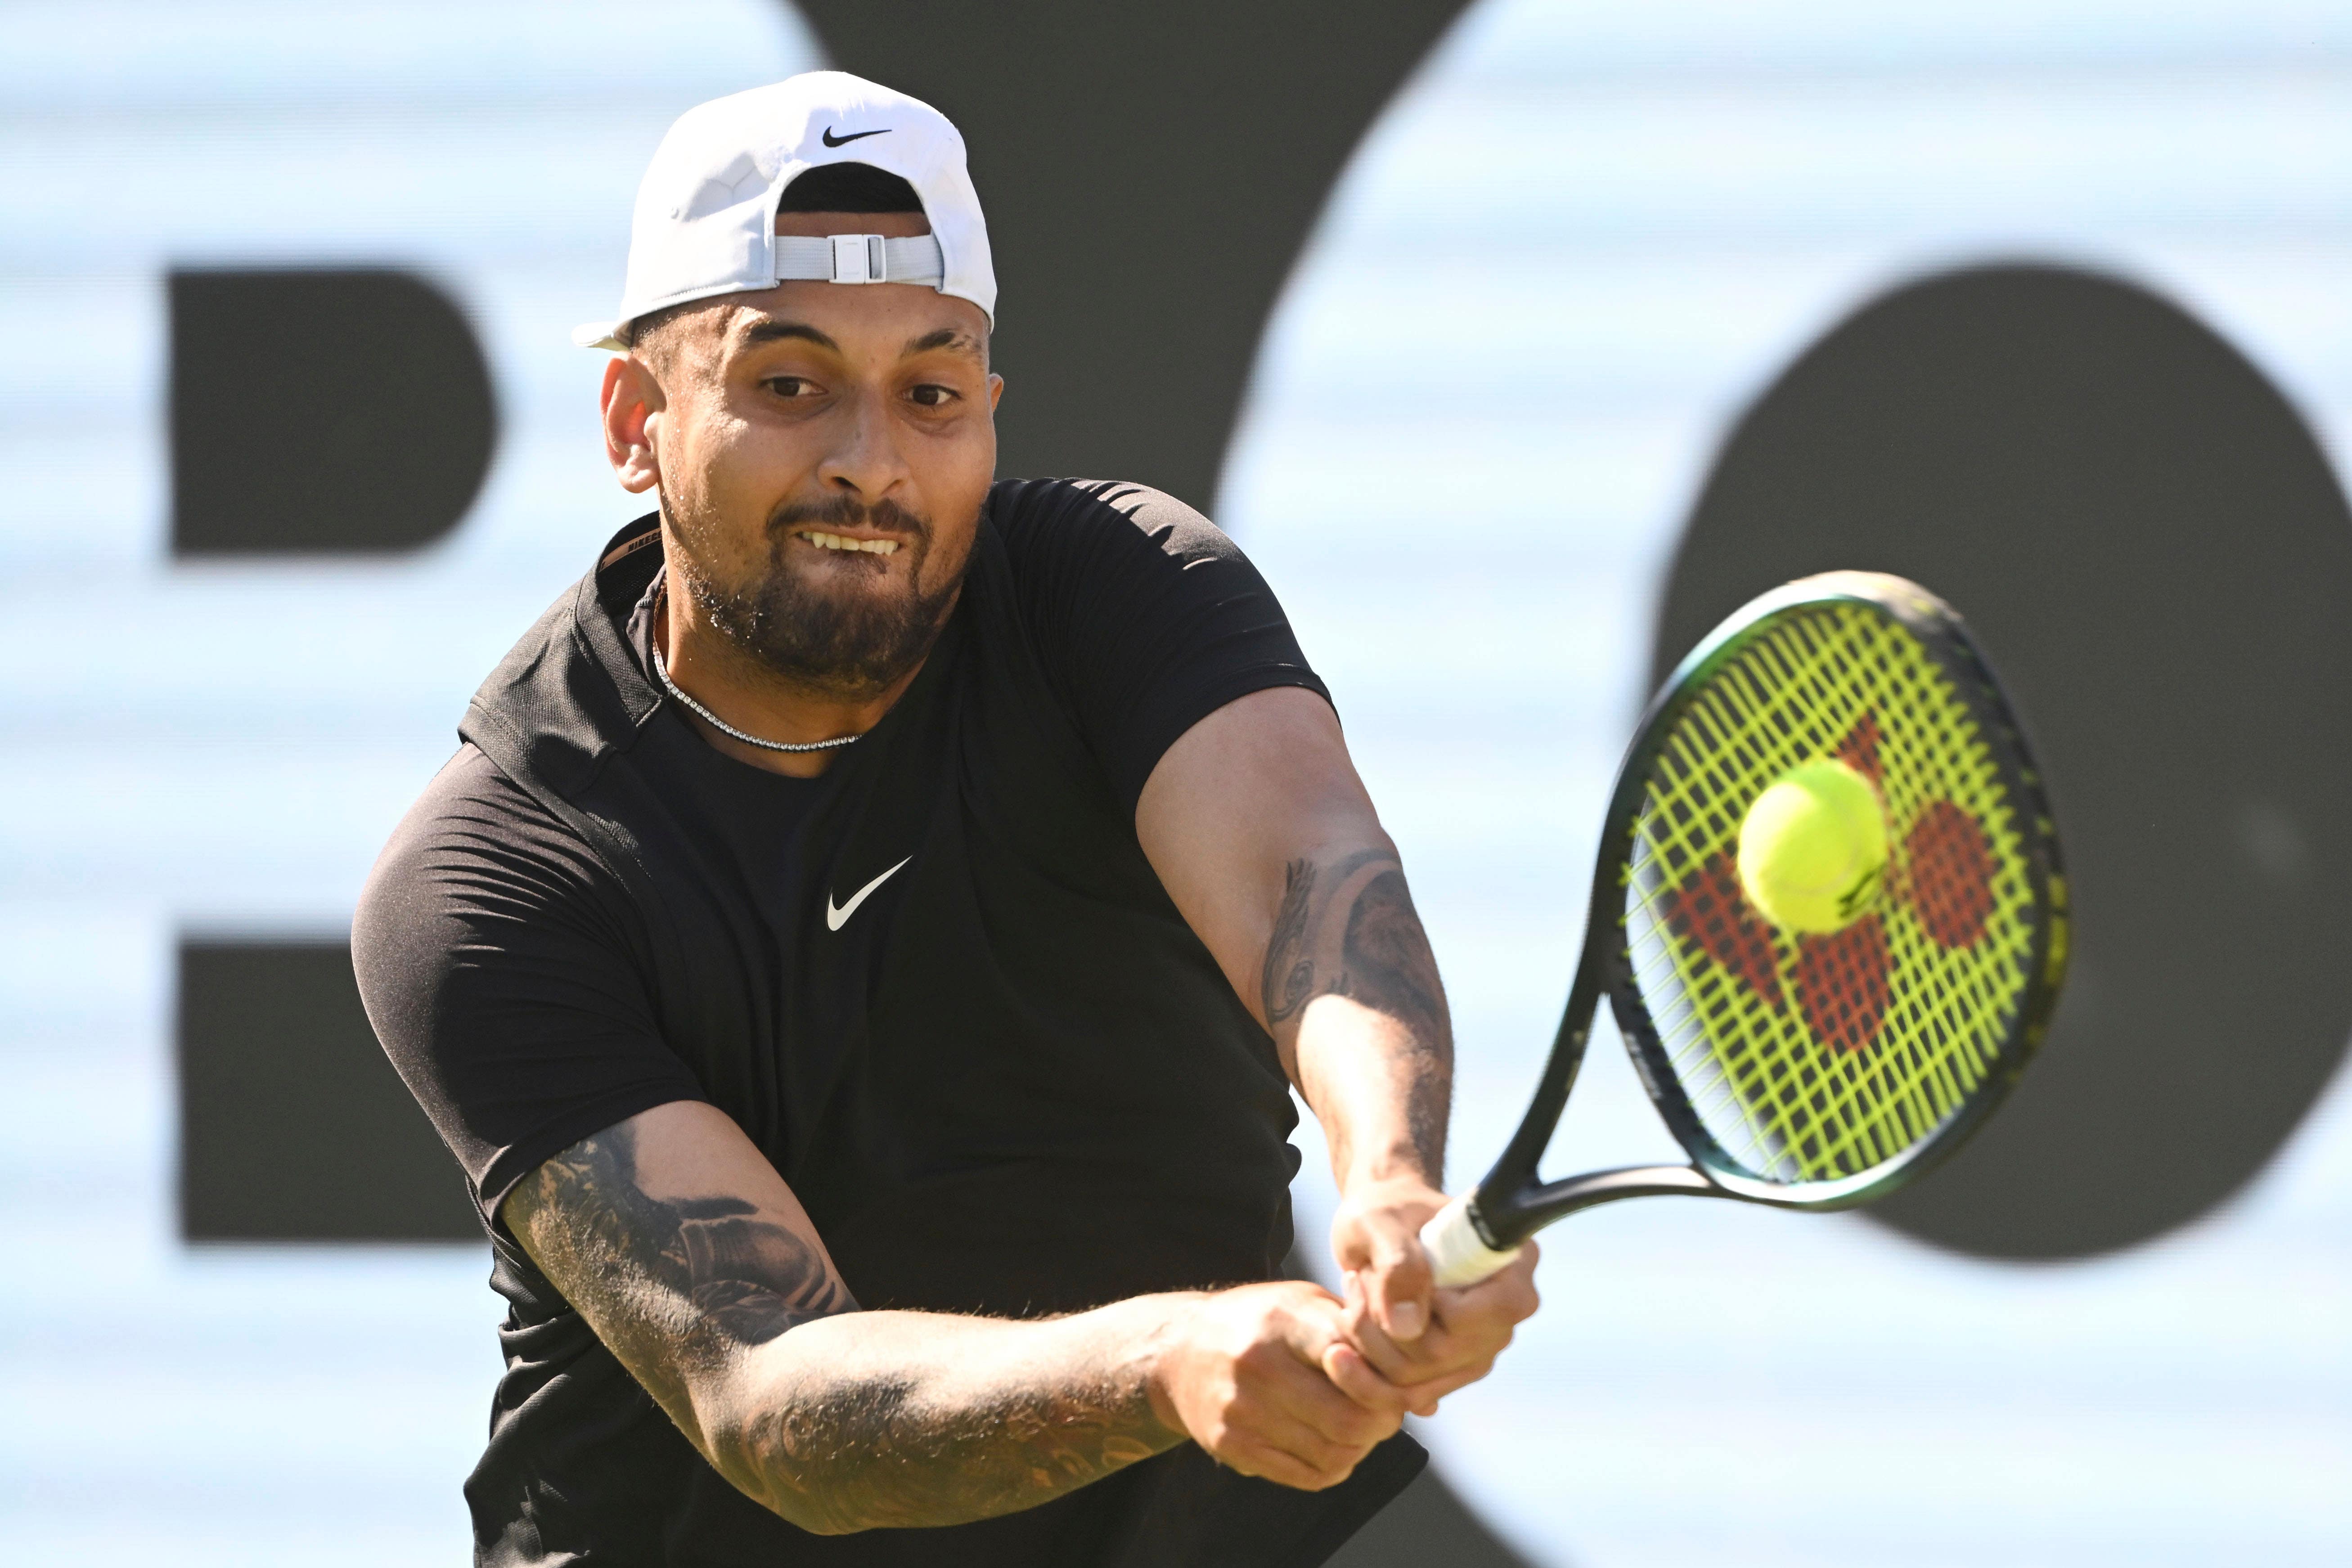 Nick Kyrgios pulls out of Halle due to knee issues but hoping to play